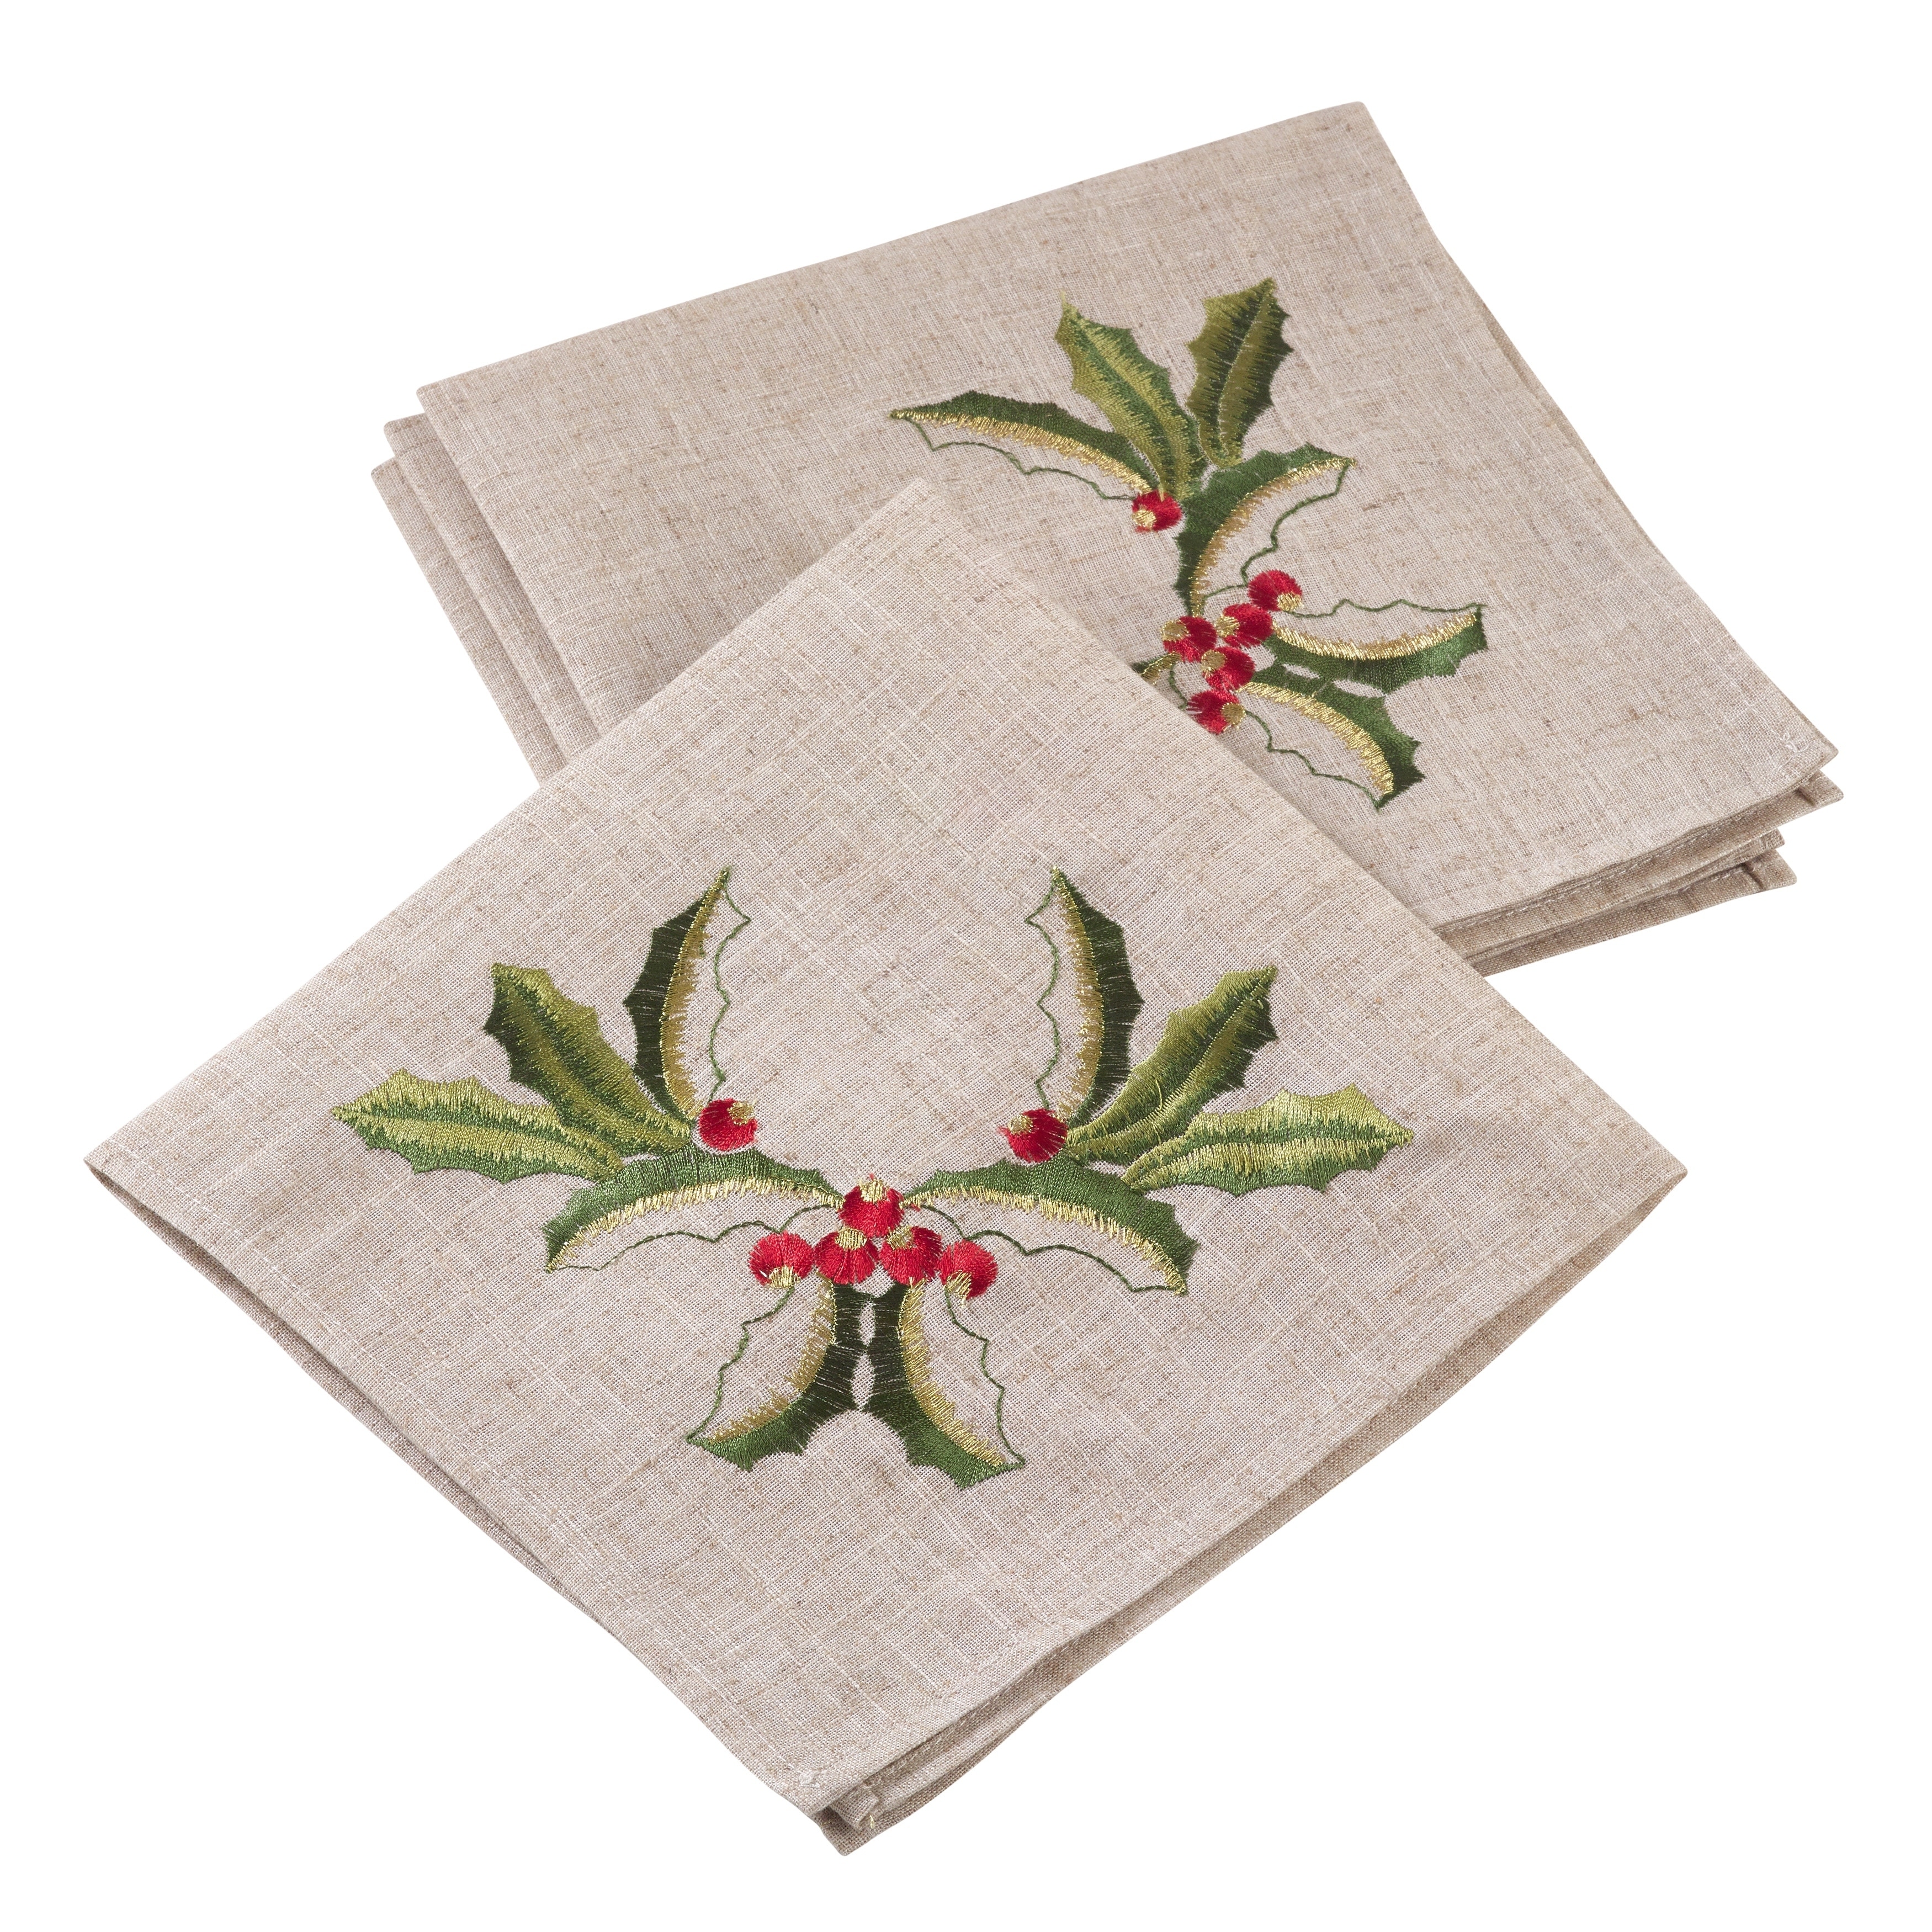 Christmas in the Country Embroidered Cotton/Linen Napkins - Set of 4